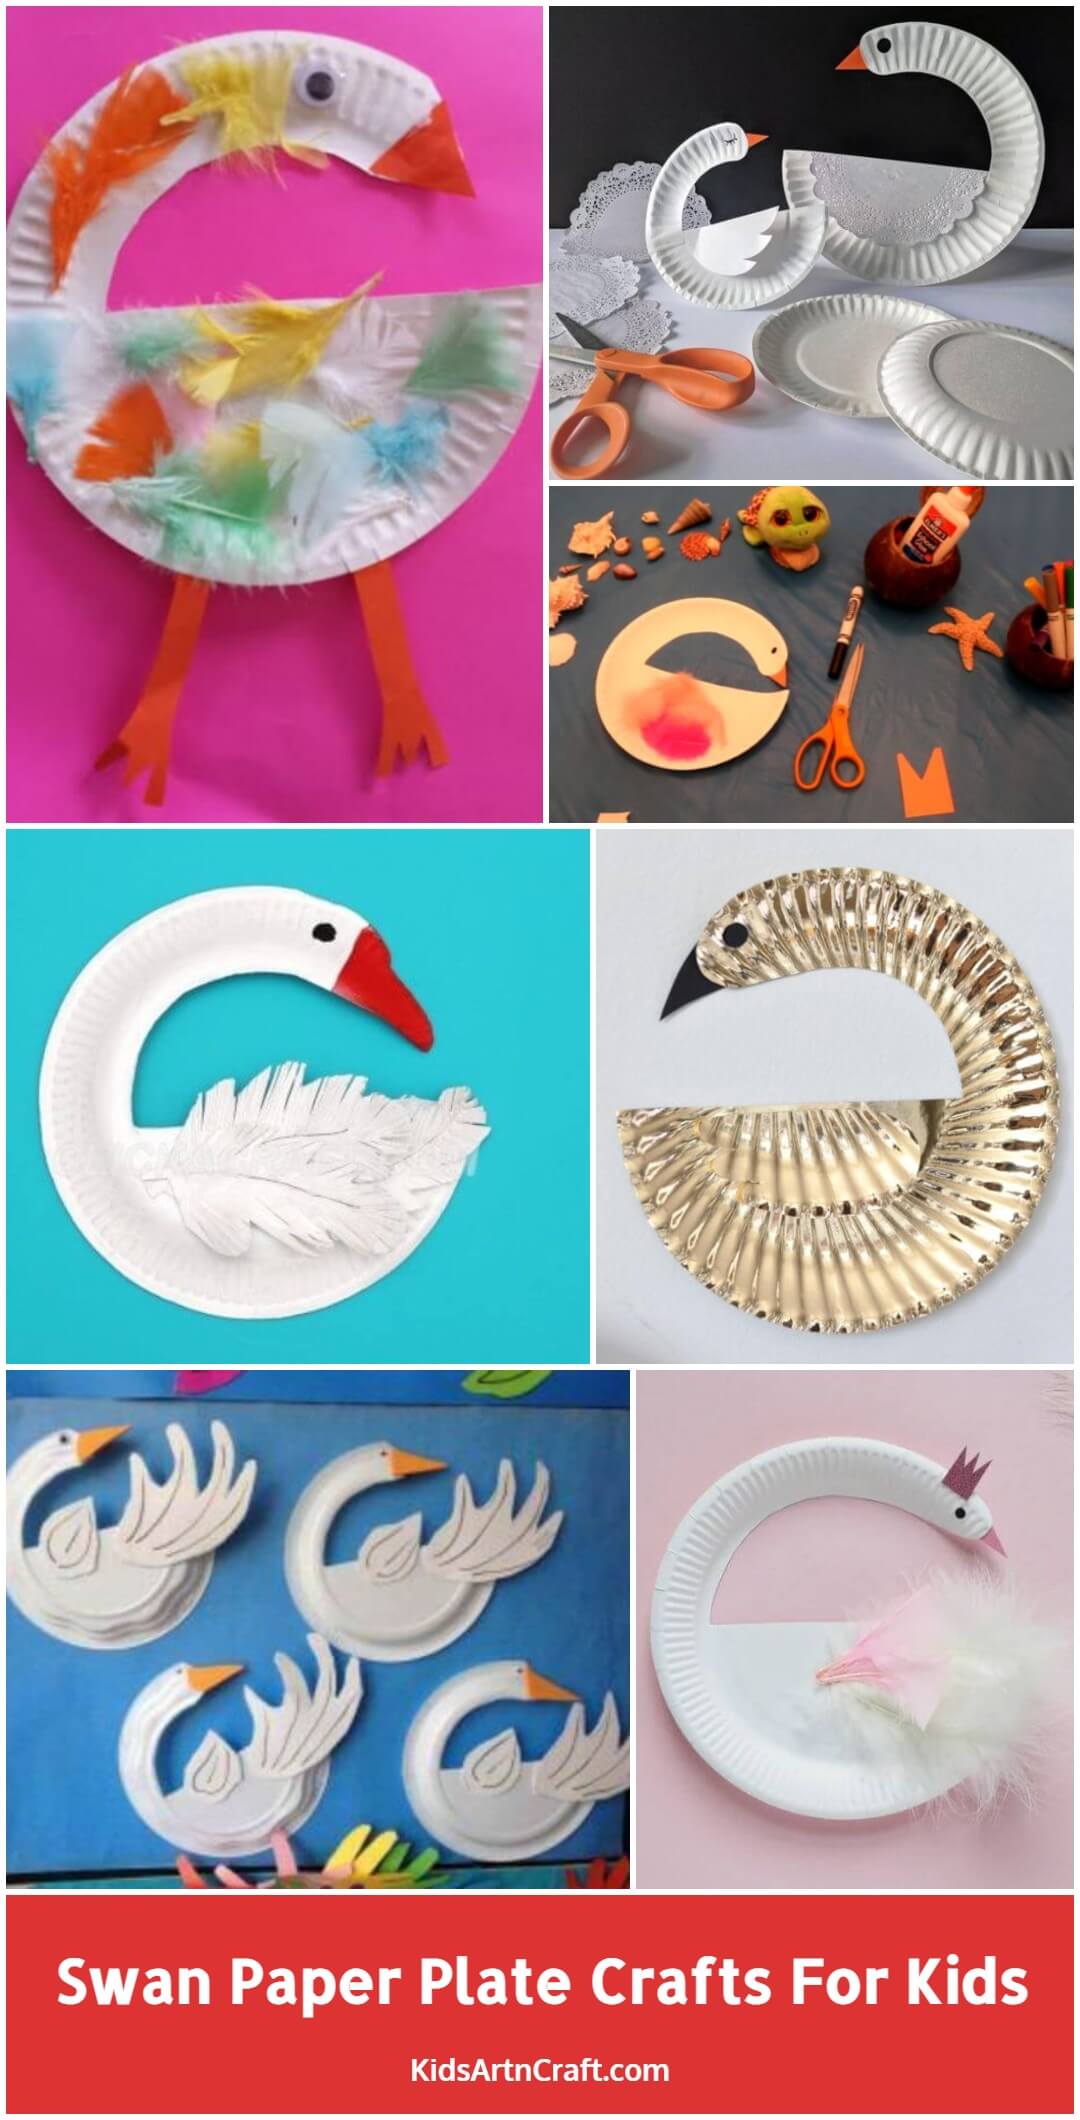 Swan Paper Plate Crafts for Kids